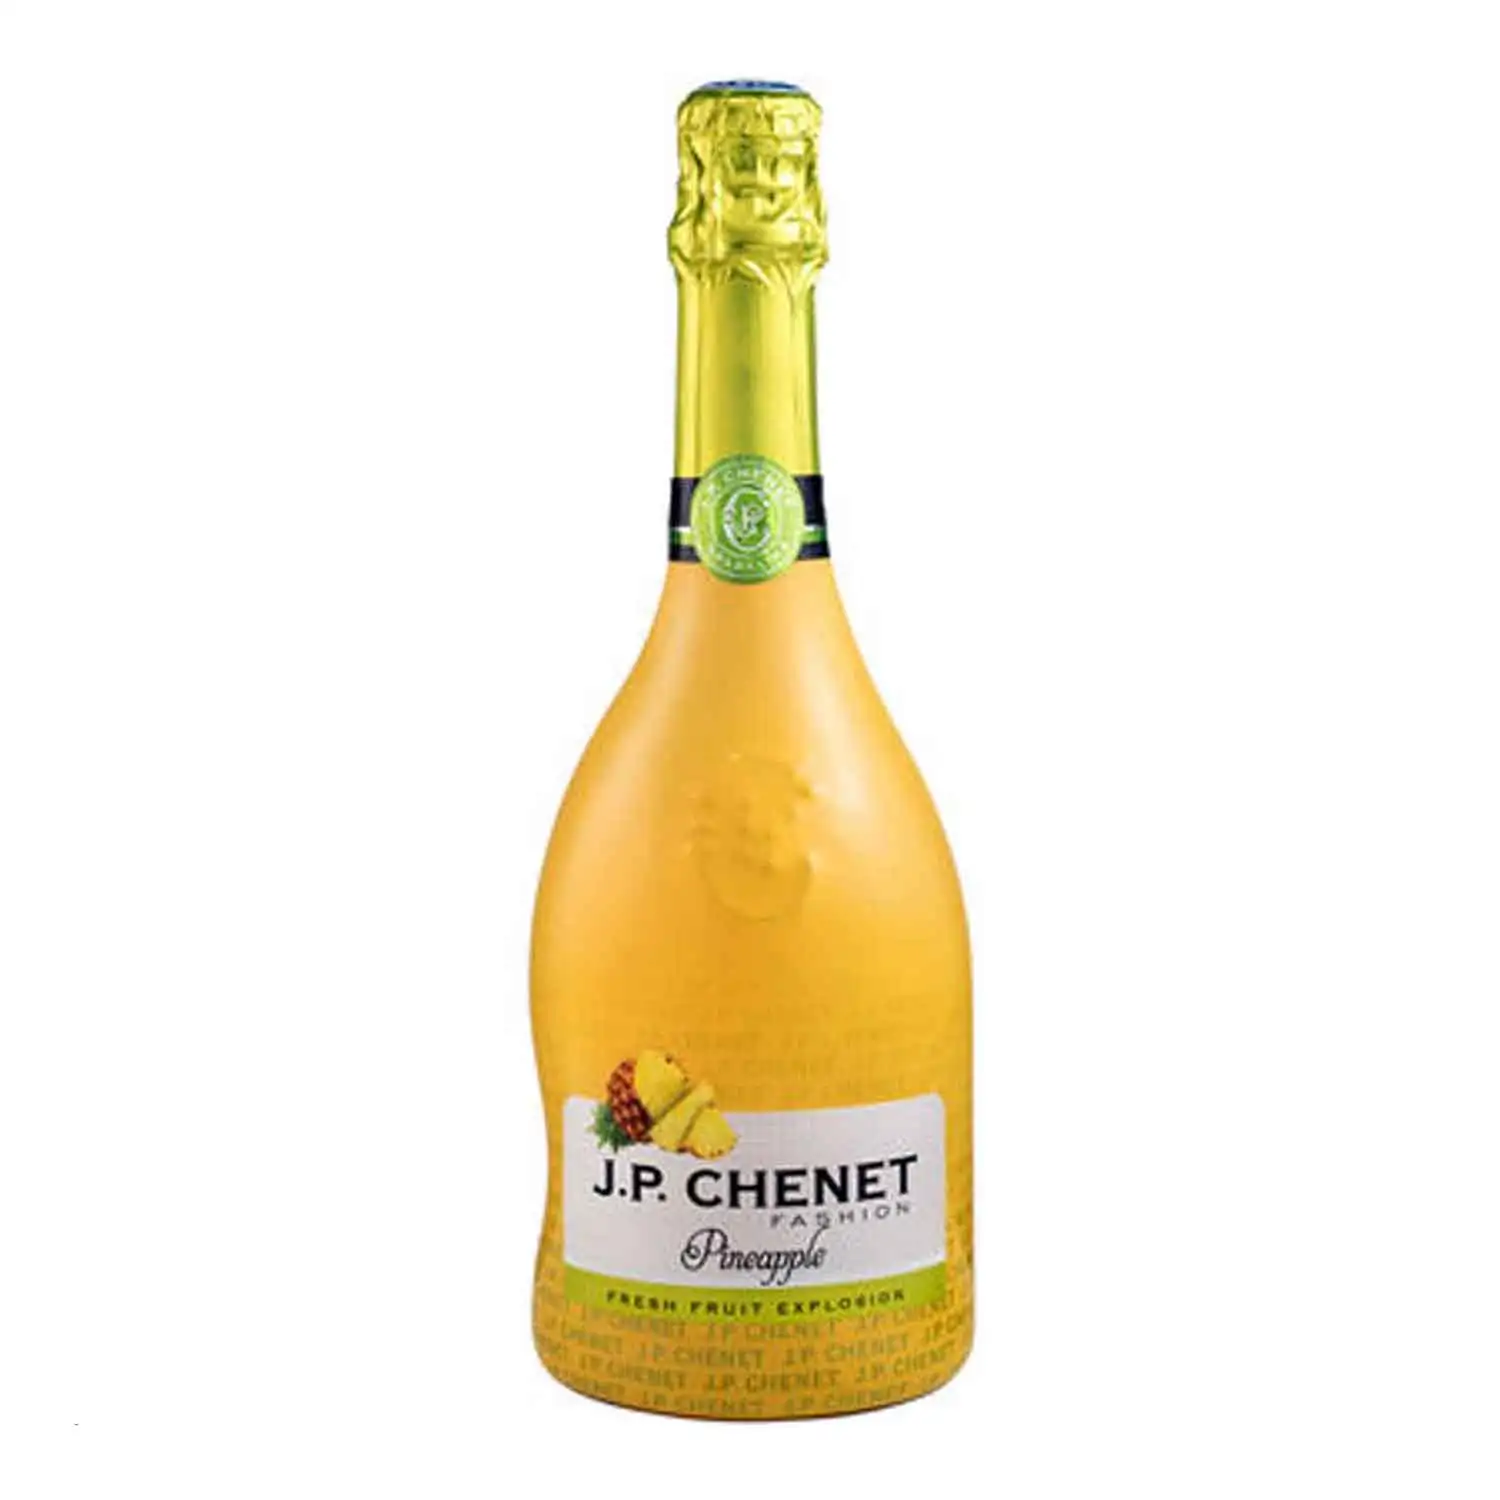 JP Chenet fashion pineapple 75cl Alc 12% - Buy at Real Tobacco